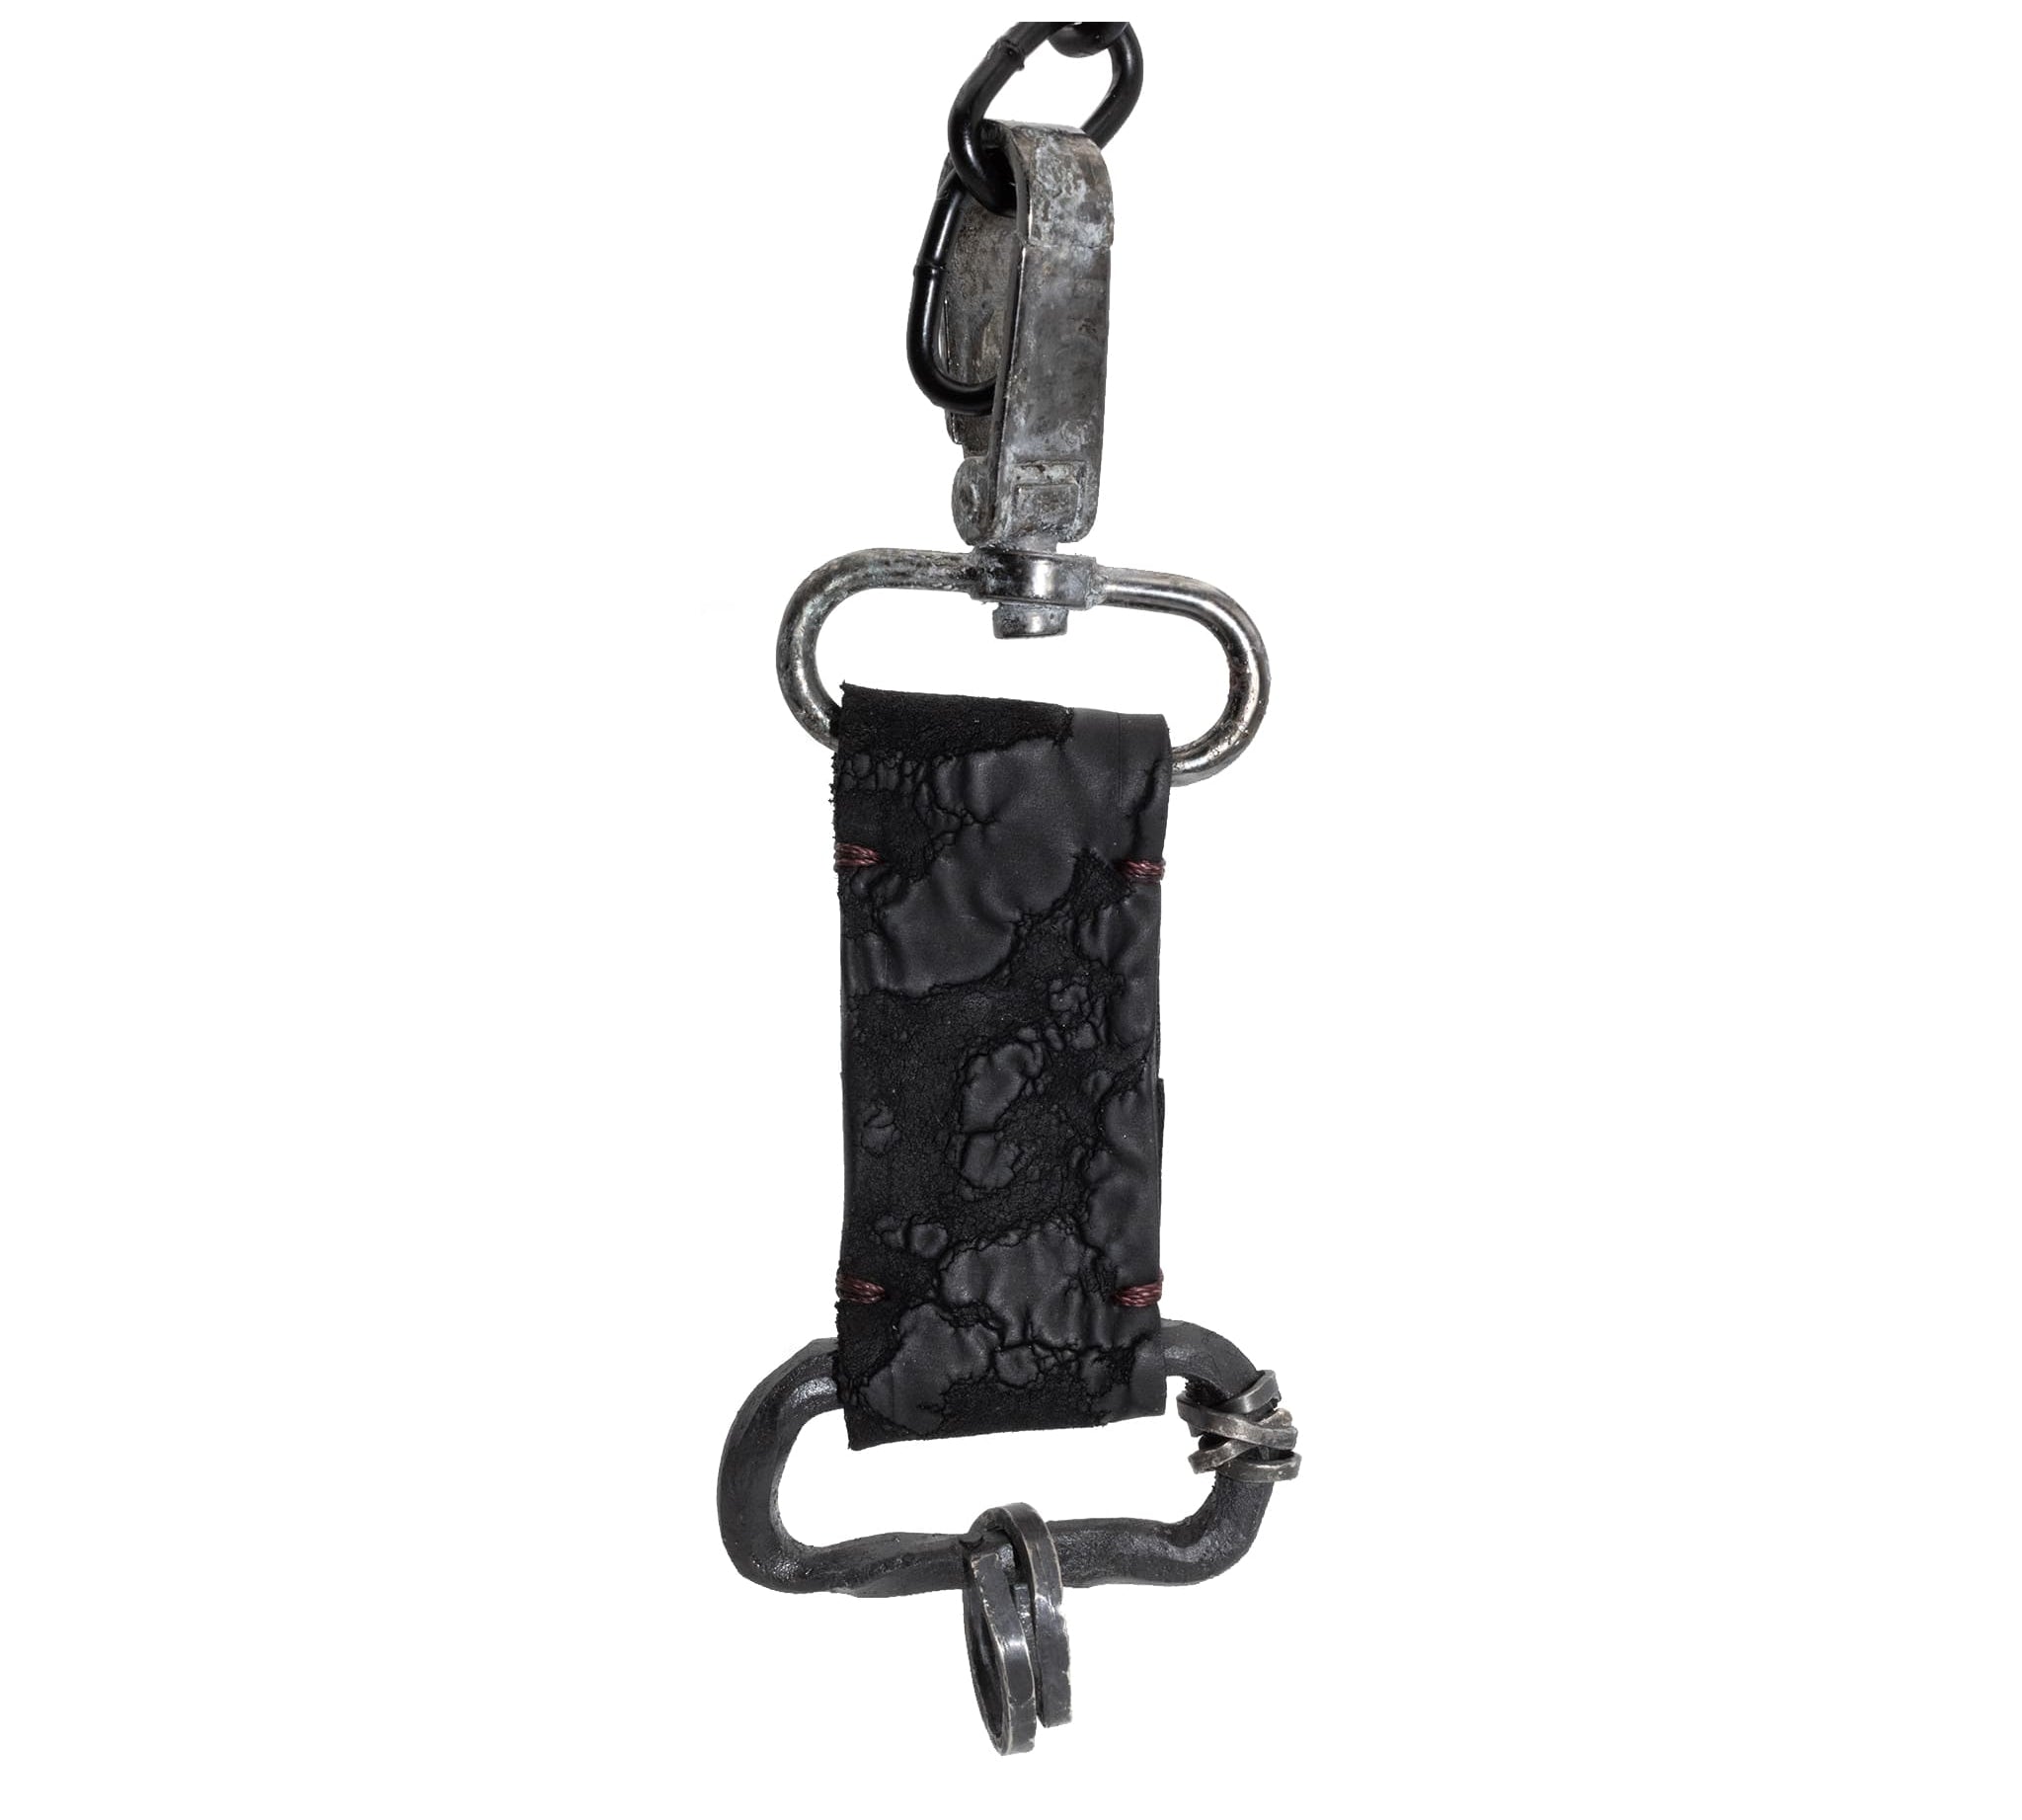 hand stitched with blood dyed thread the black reverse horse culatta leather keychain features a military clip and hand forged iron hardware with .925 sterling silver details.